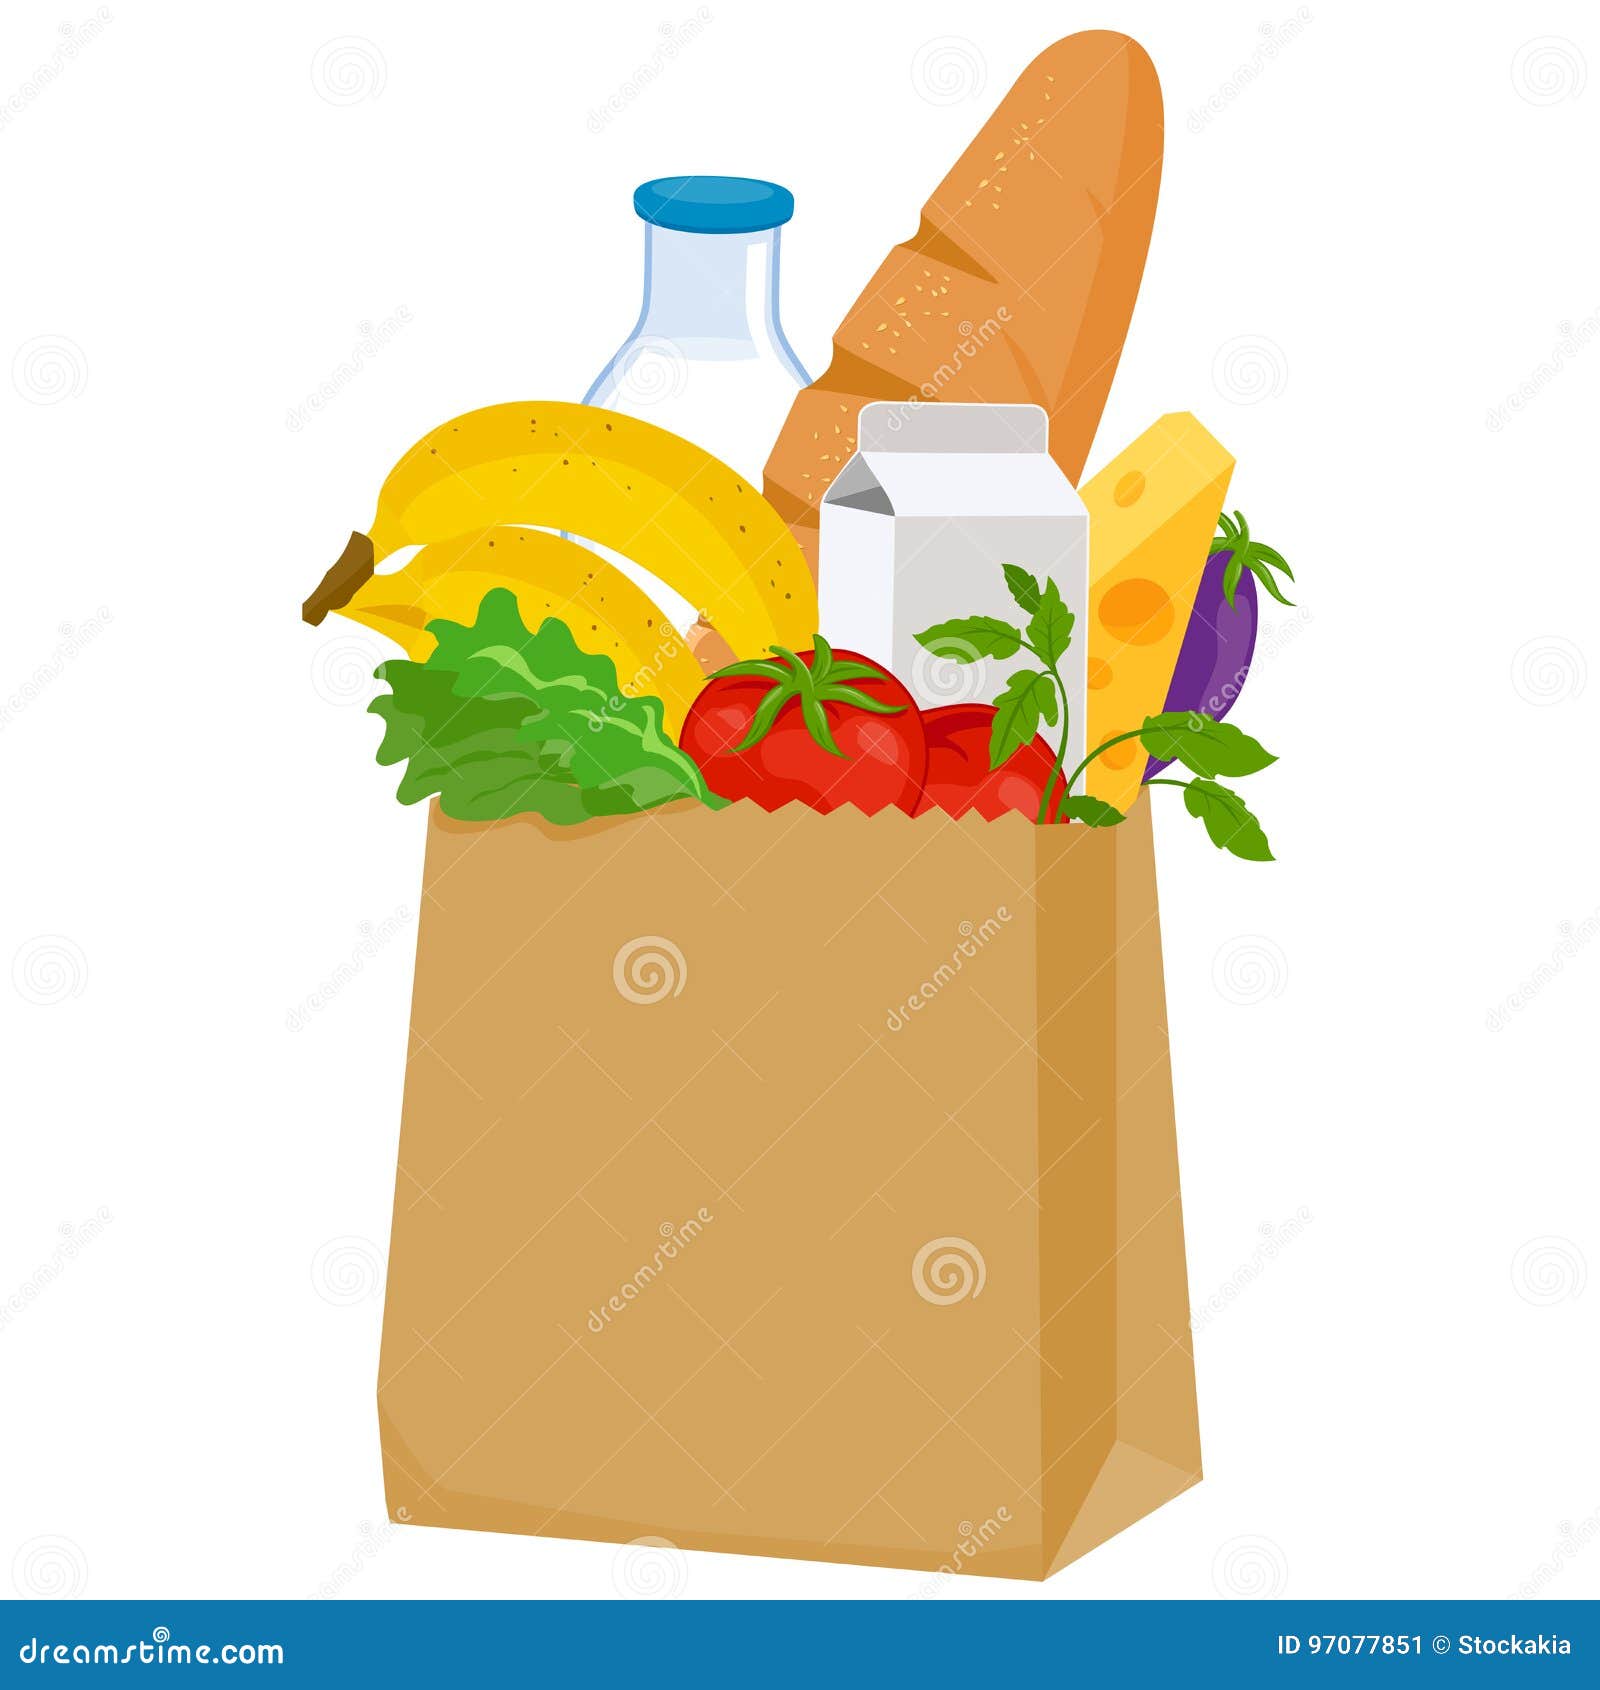 Free Vector  Shopping bag basket composition with isolated image of food  products in paper bag